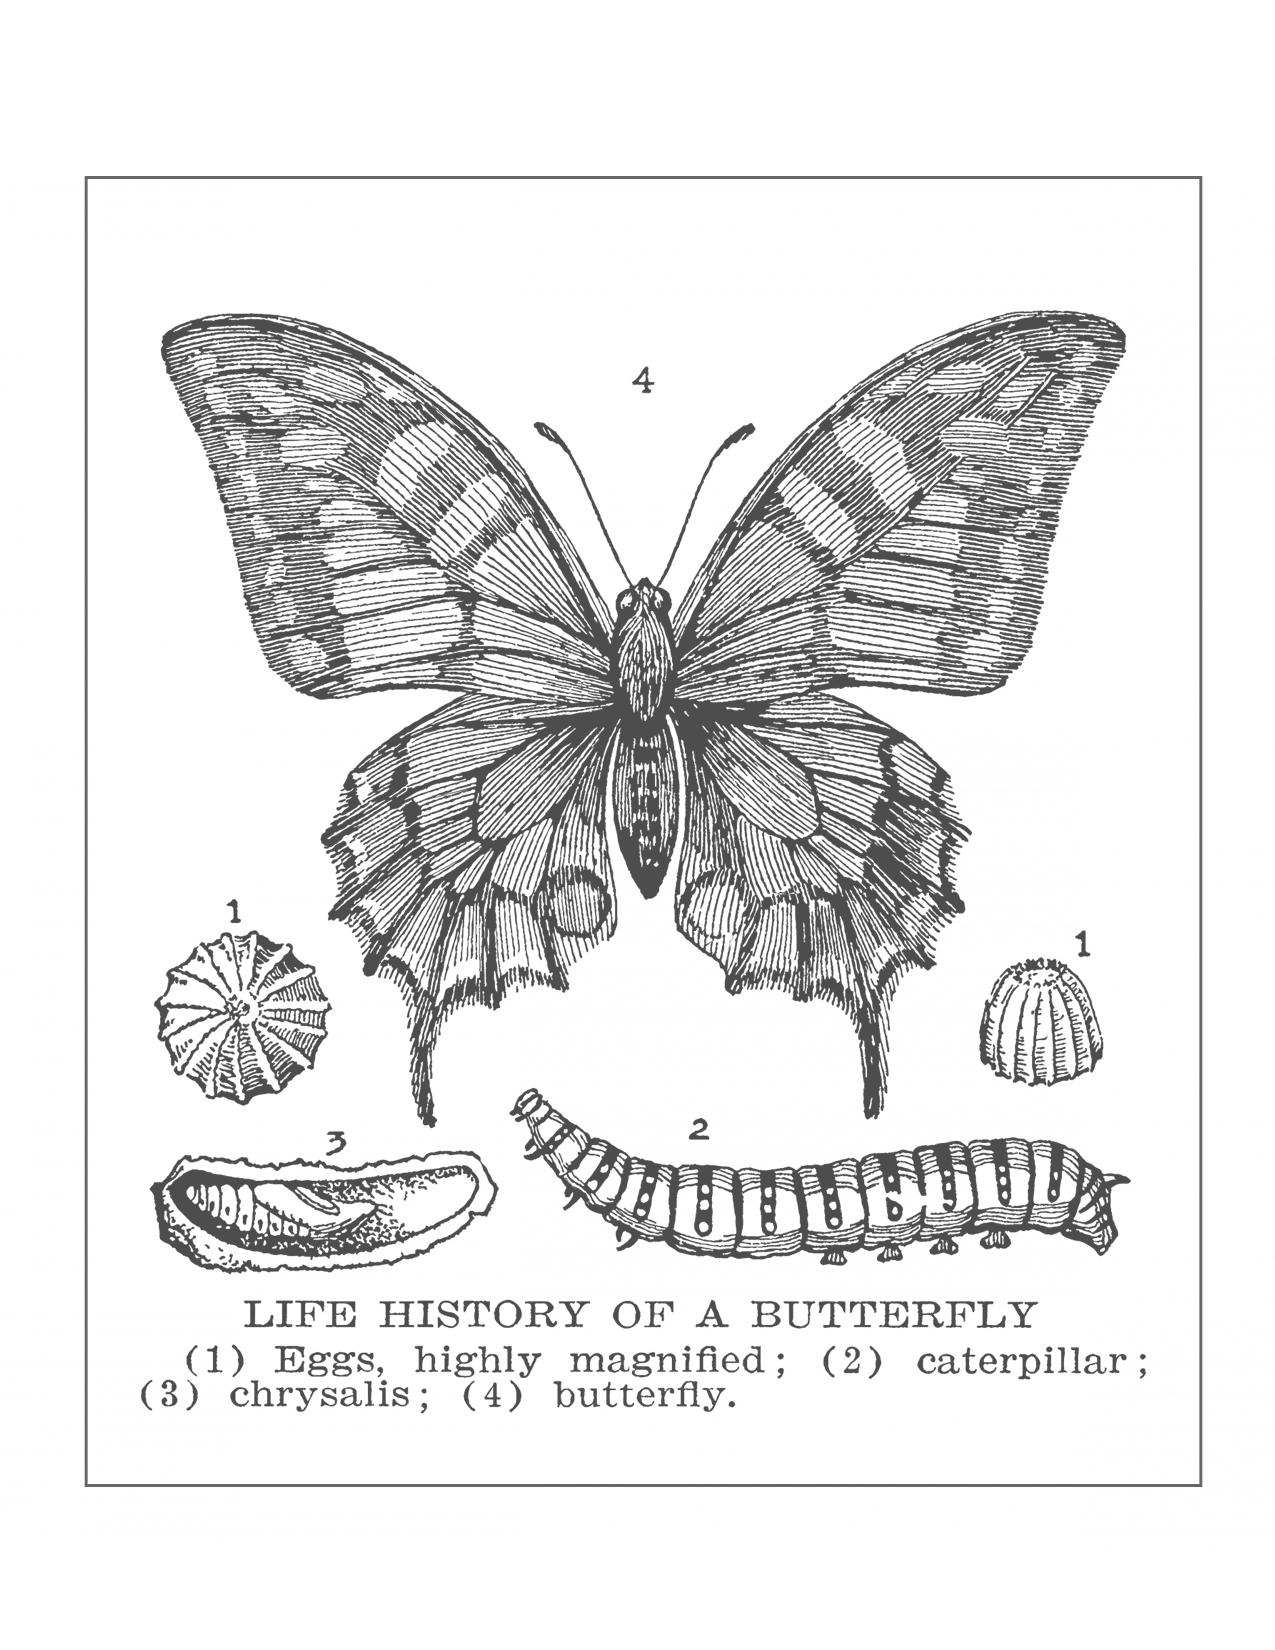 Butterfly Life History Printable Poster